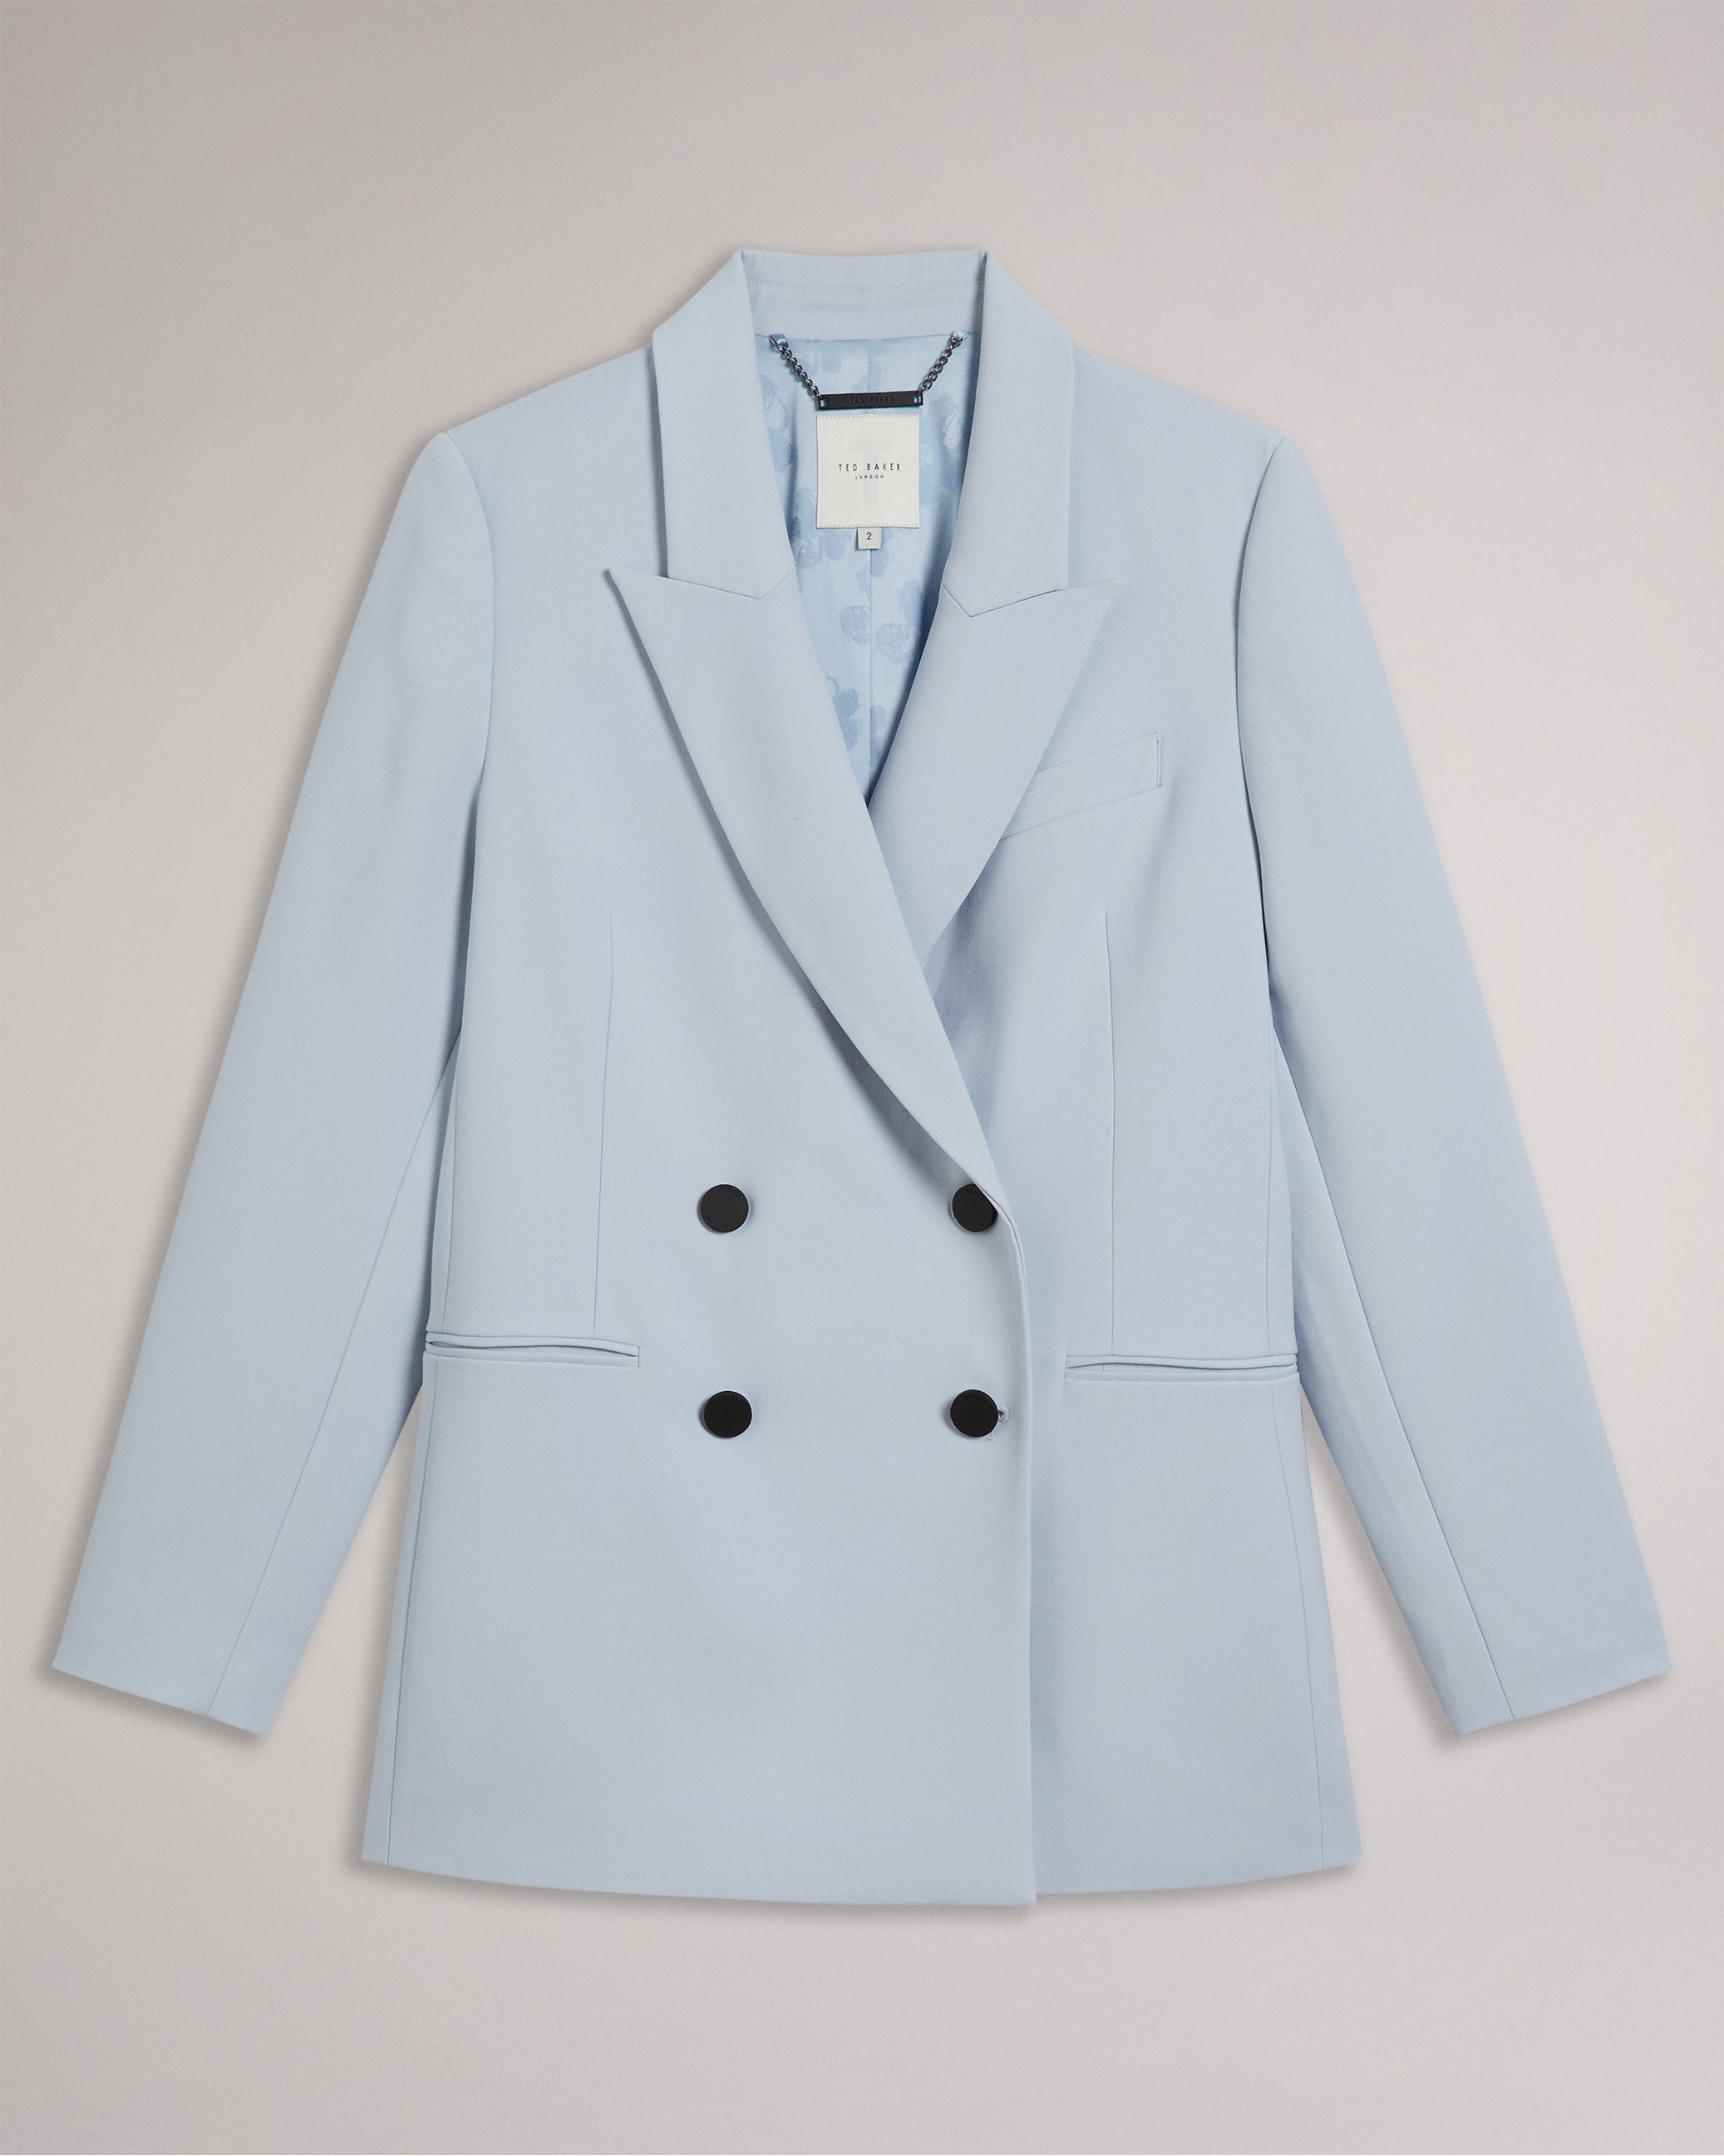 Hildia Long Line Double Breasted Jacket Baby-Blue